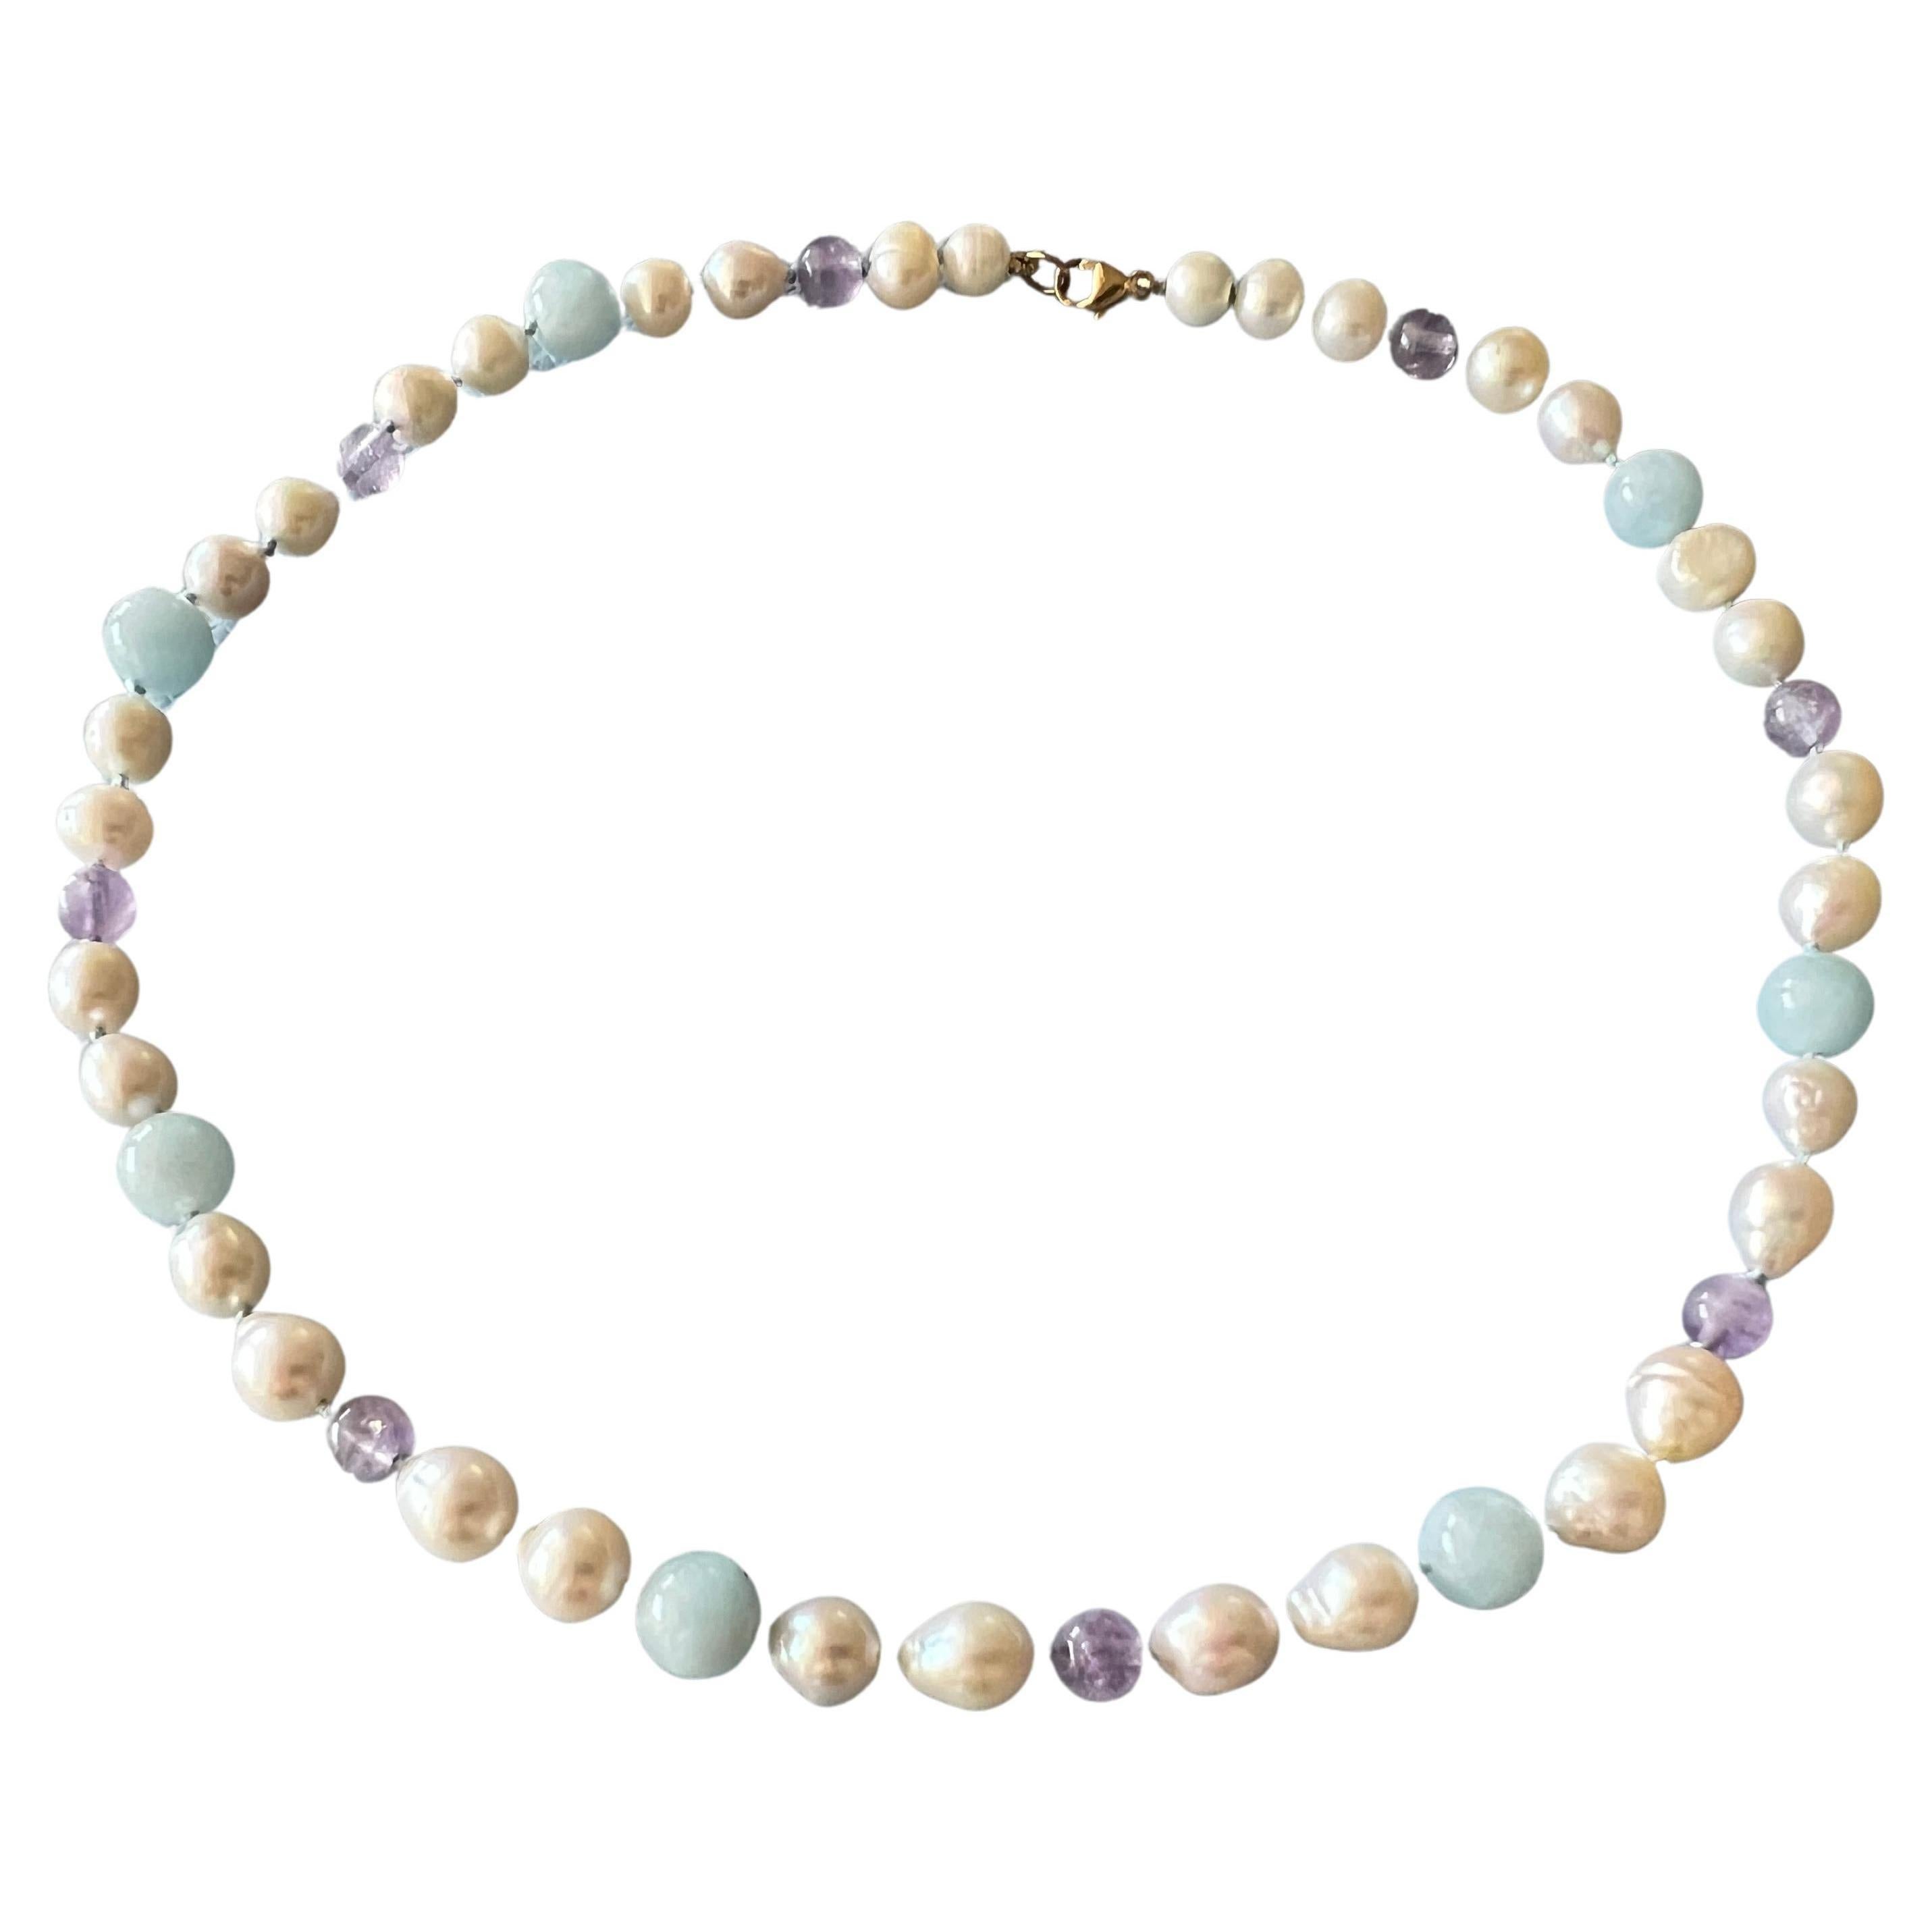 Aquamarine Amethyst Pearl Choker Bead Necklace Gold Filled J Dauphin

Length: Necklace 16